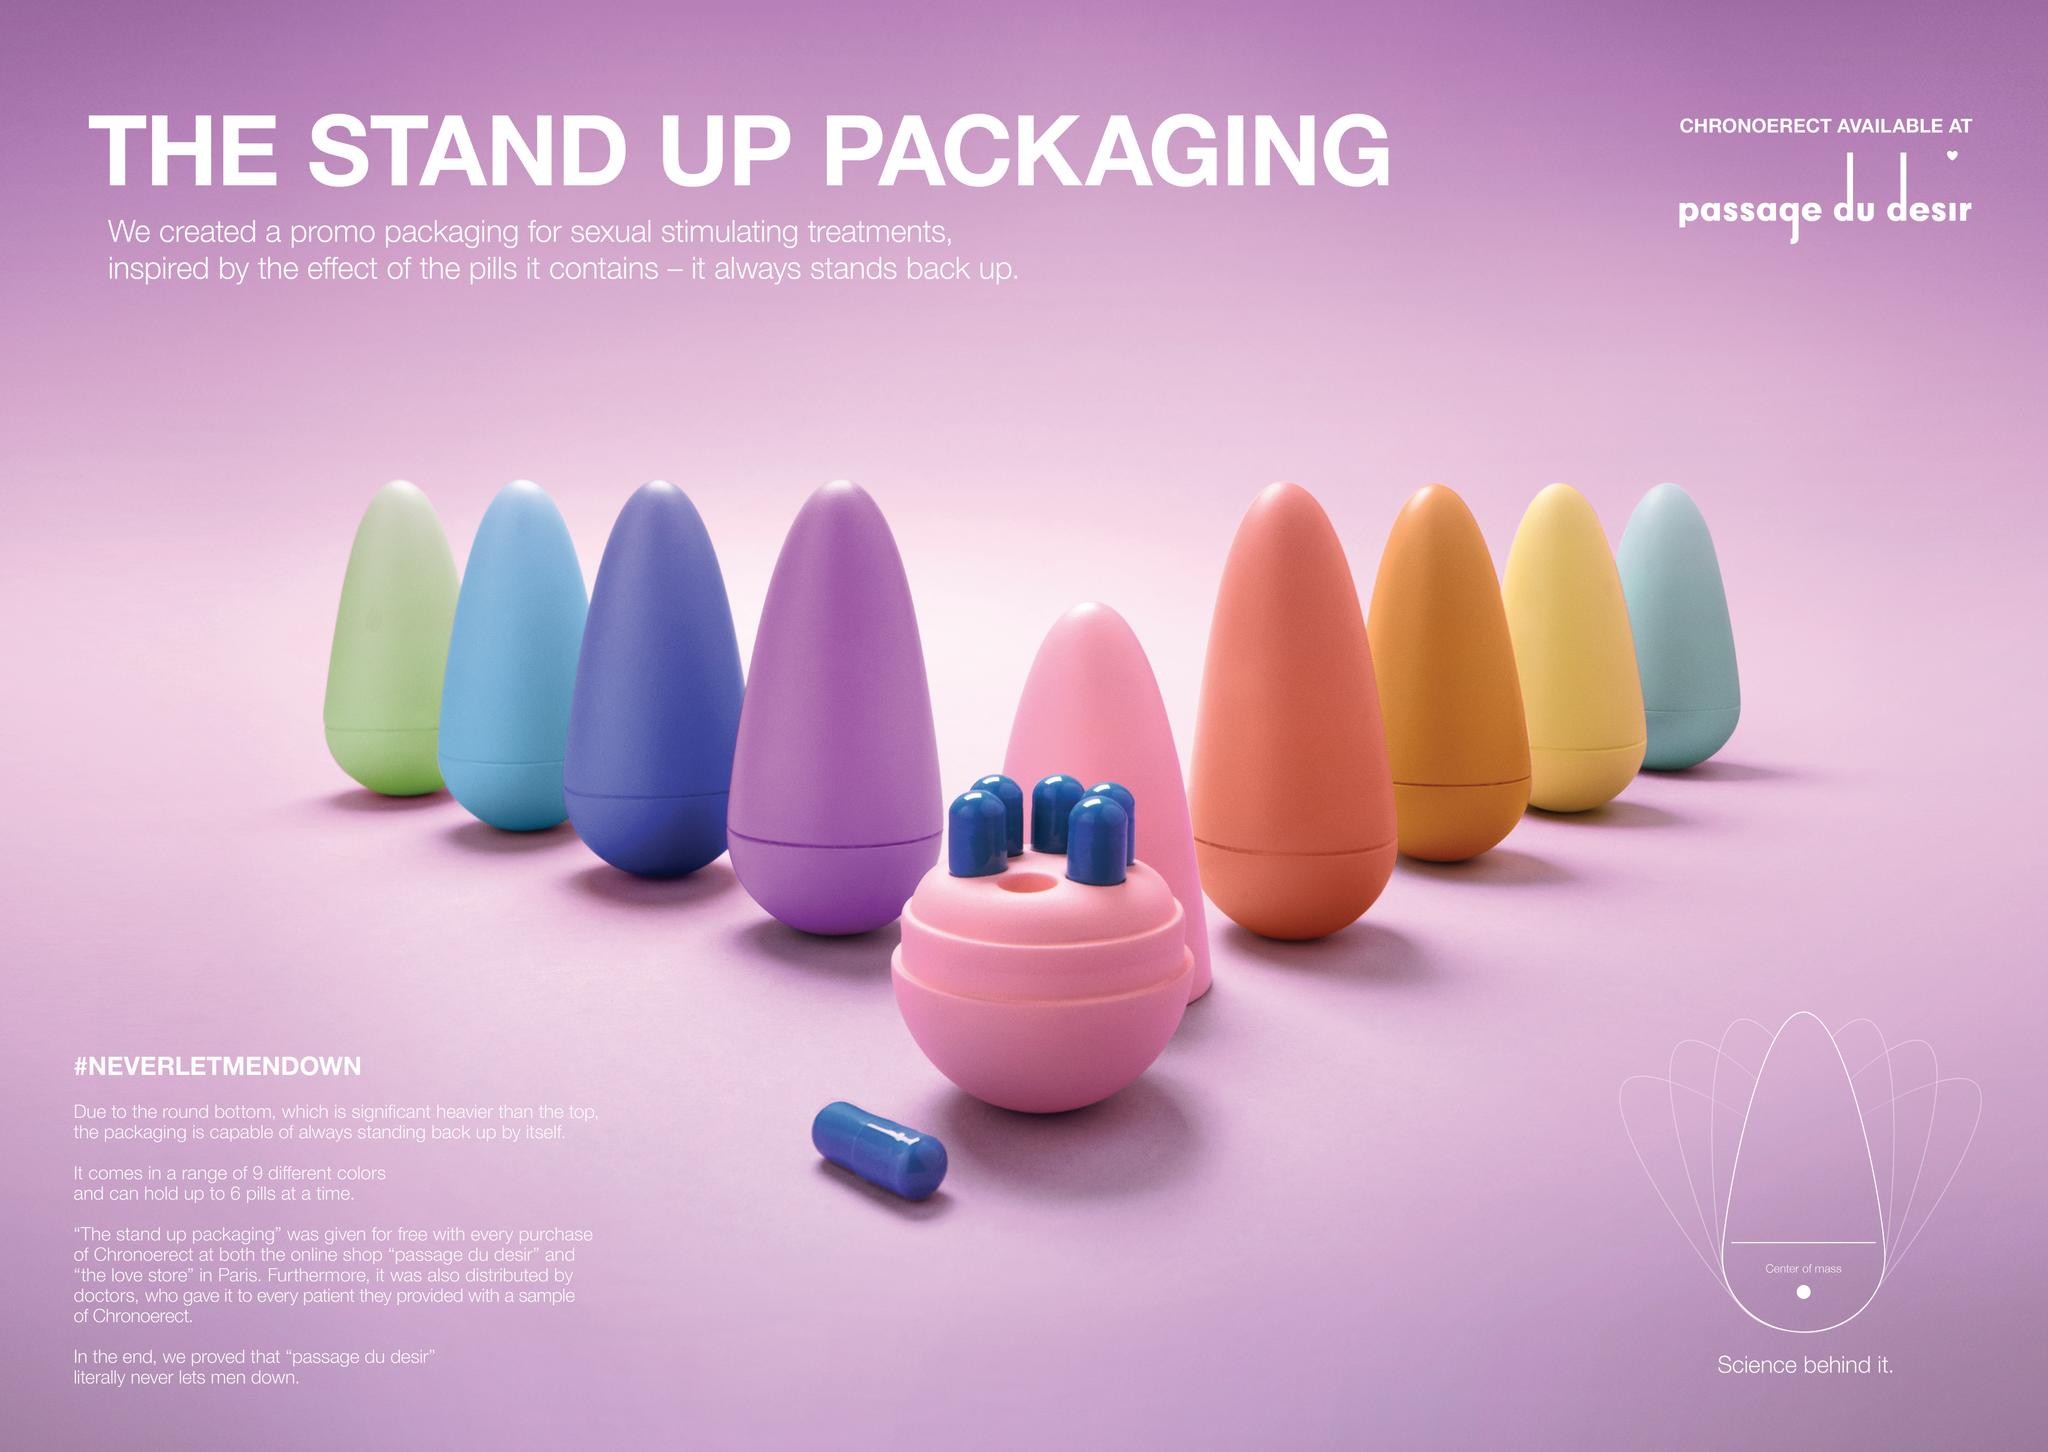 The Stand Up Packaging